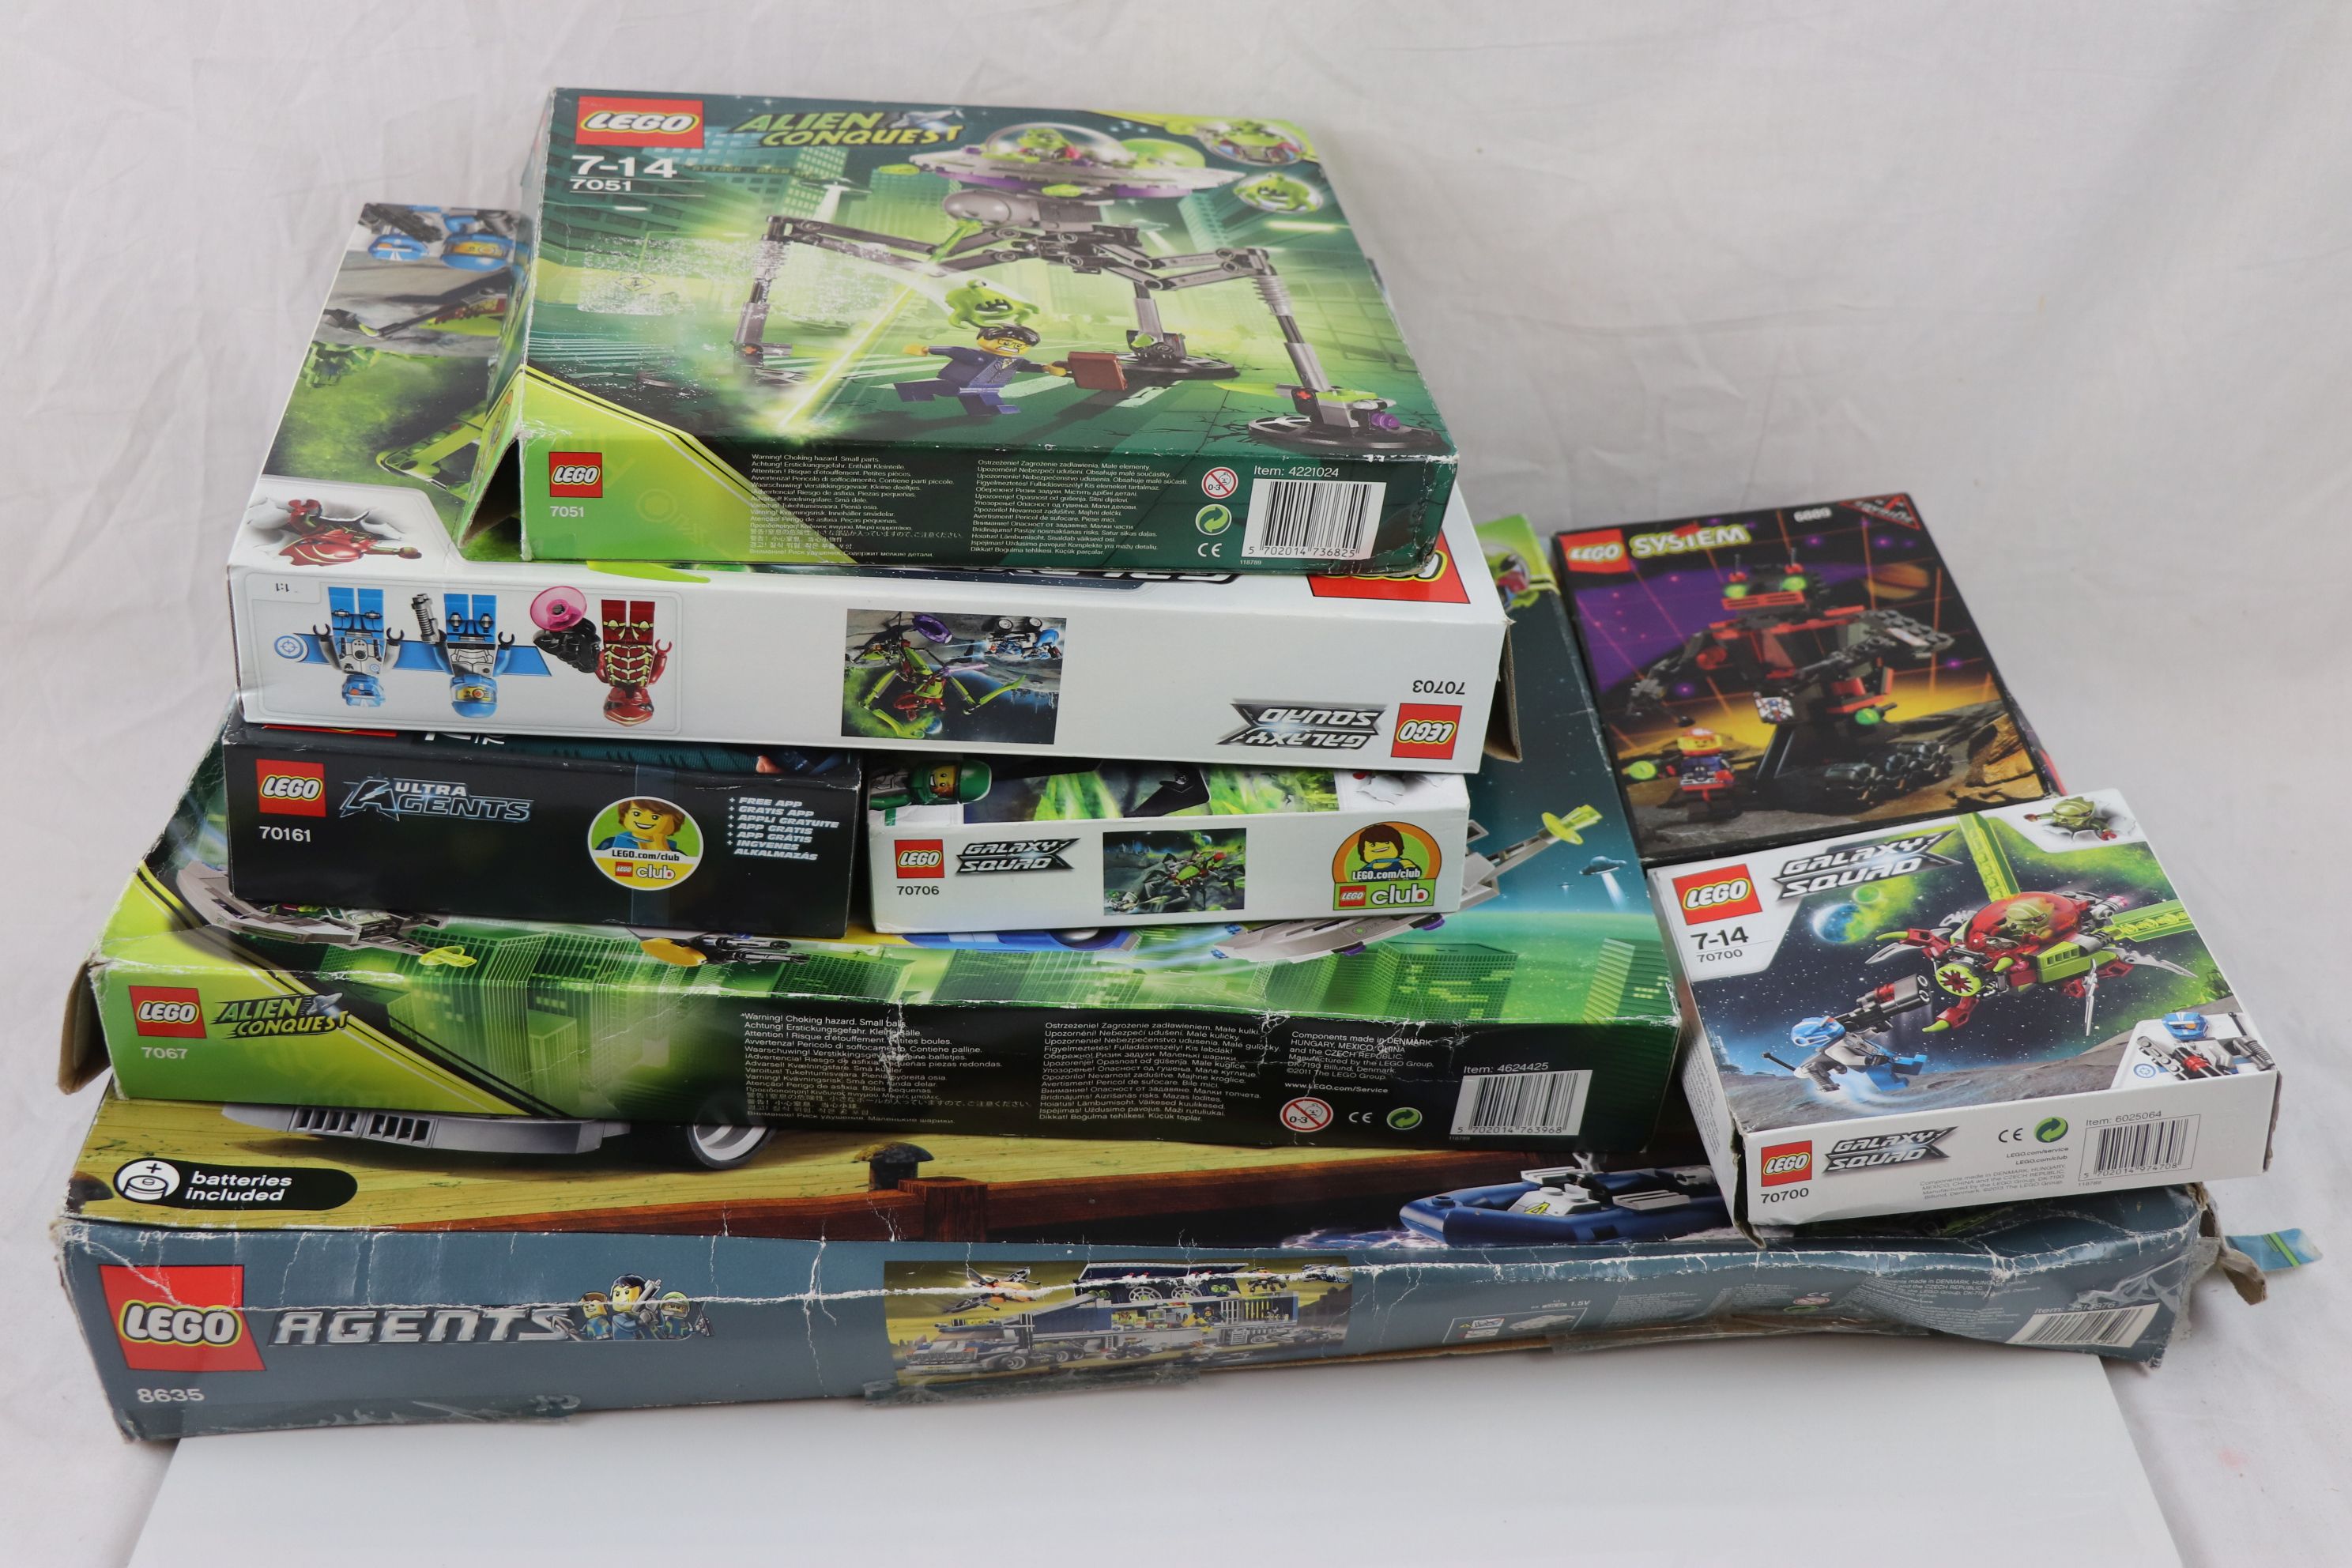 10 Boxed Lego sets to include Agents Mission 6 8635, 2 x Alien Conquests (7067 & 7051), 3 x Galaxy - Image 2 of 10